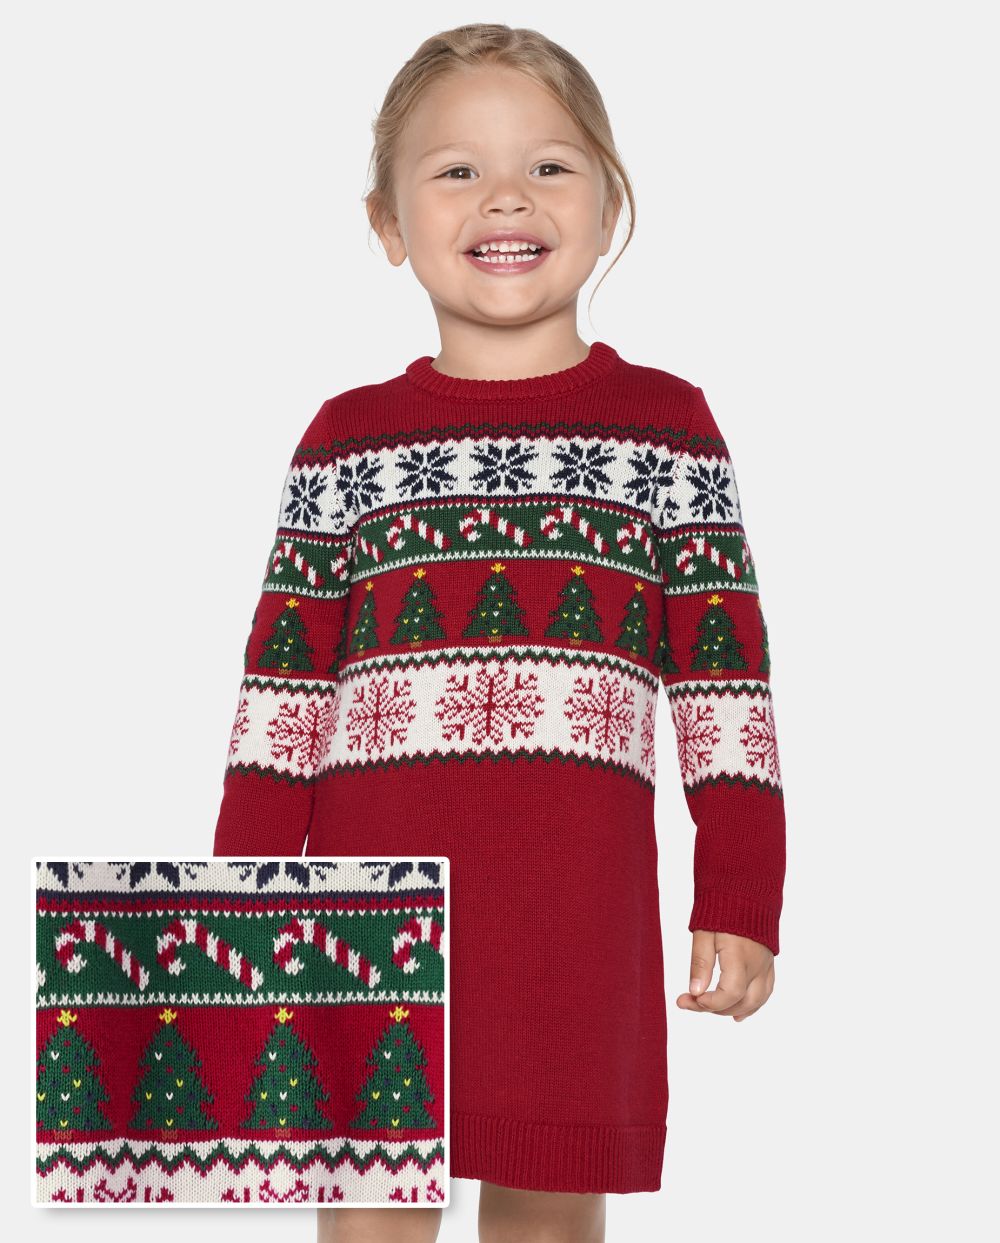 Toddler Baby Sweater Above the Knee Crew Neck Long Sleeves Dress